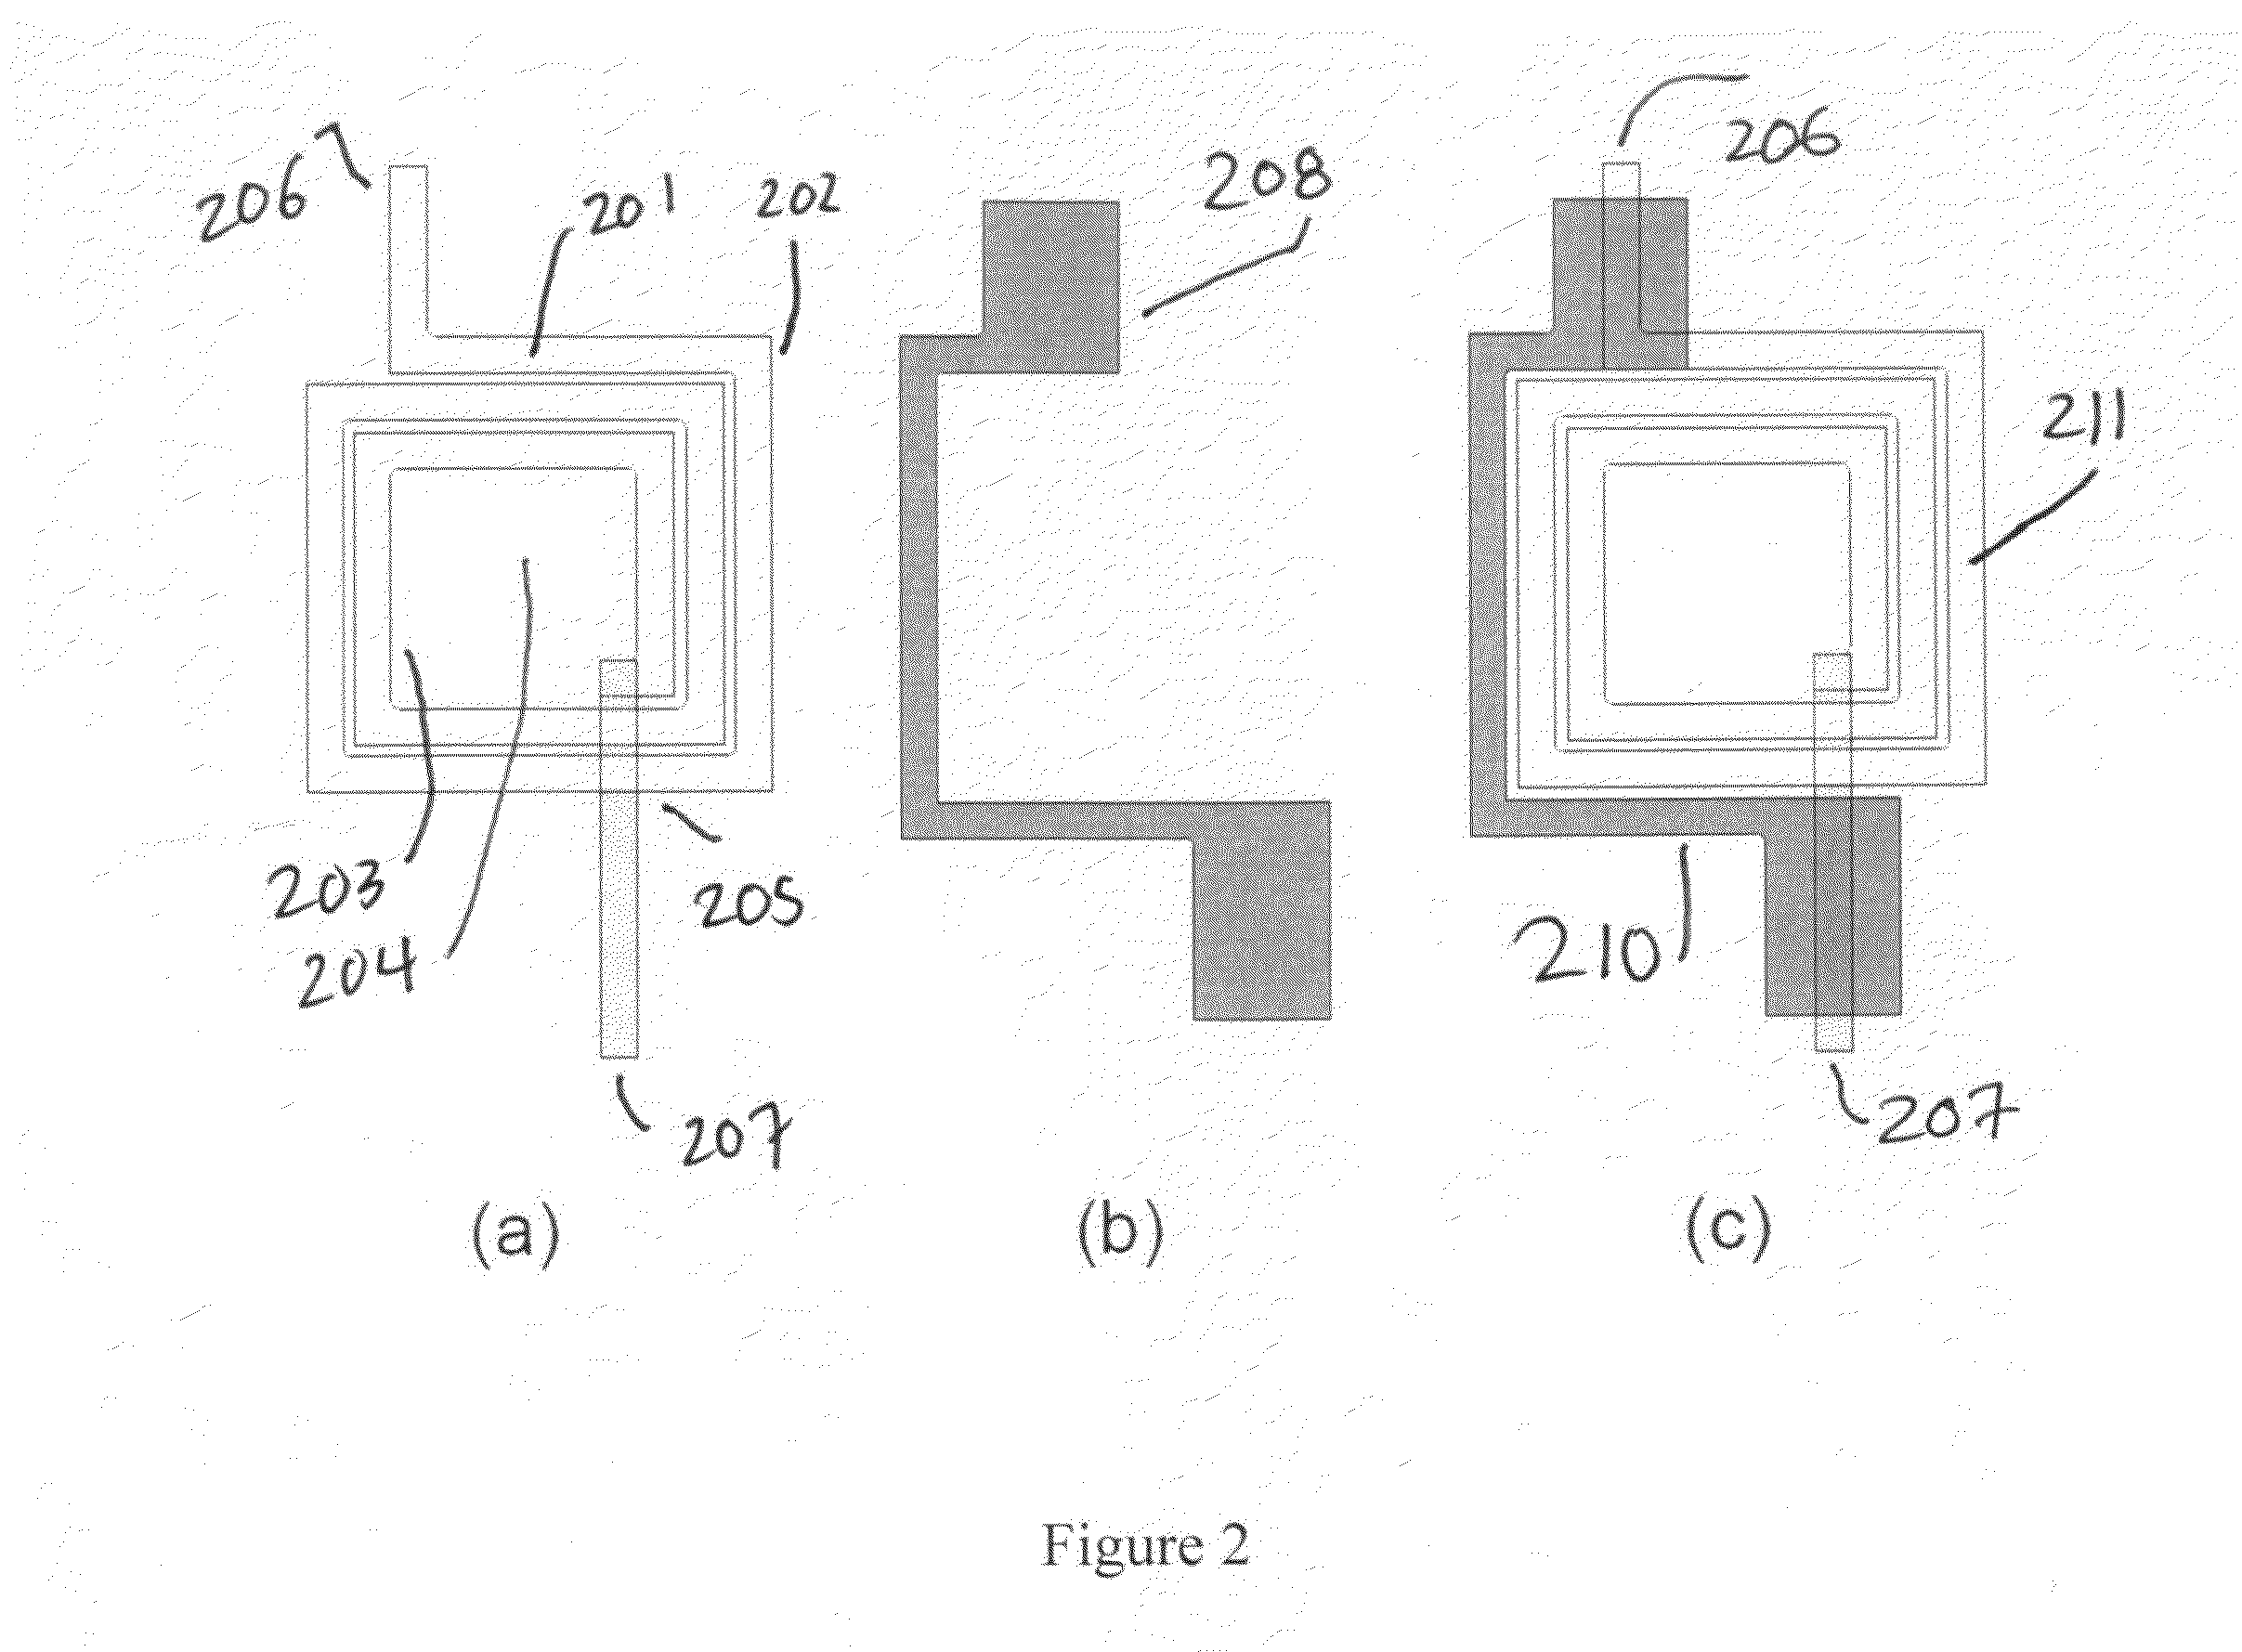 Compact-area capacitive plates for use with spiral inductors having more than one turn